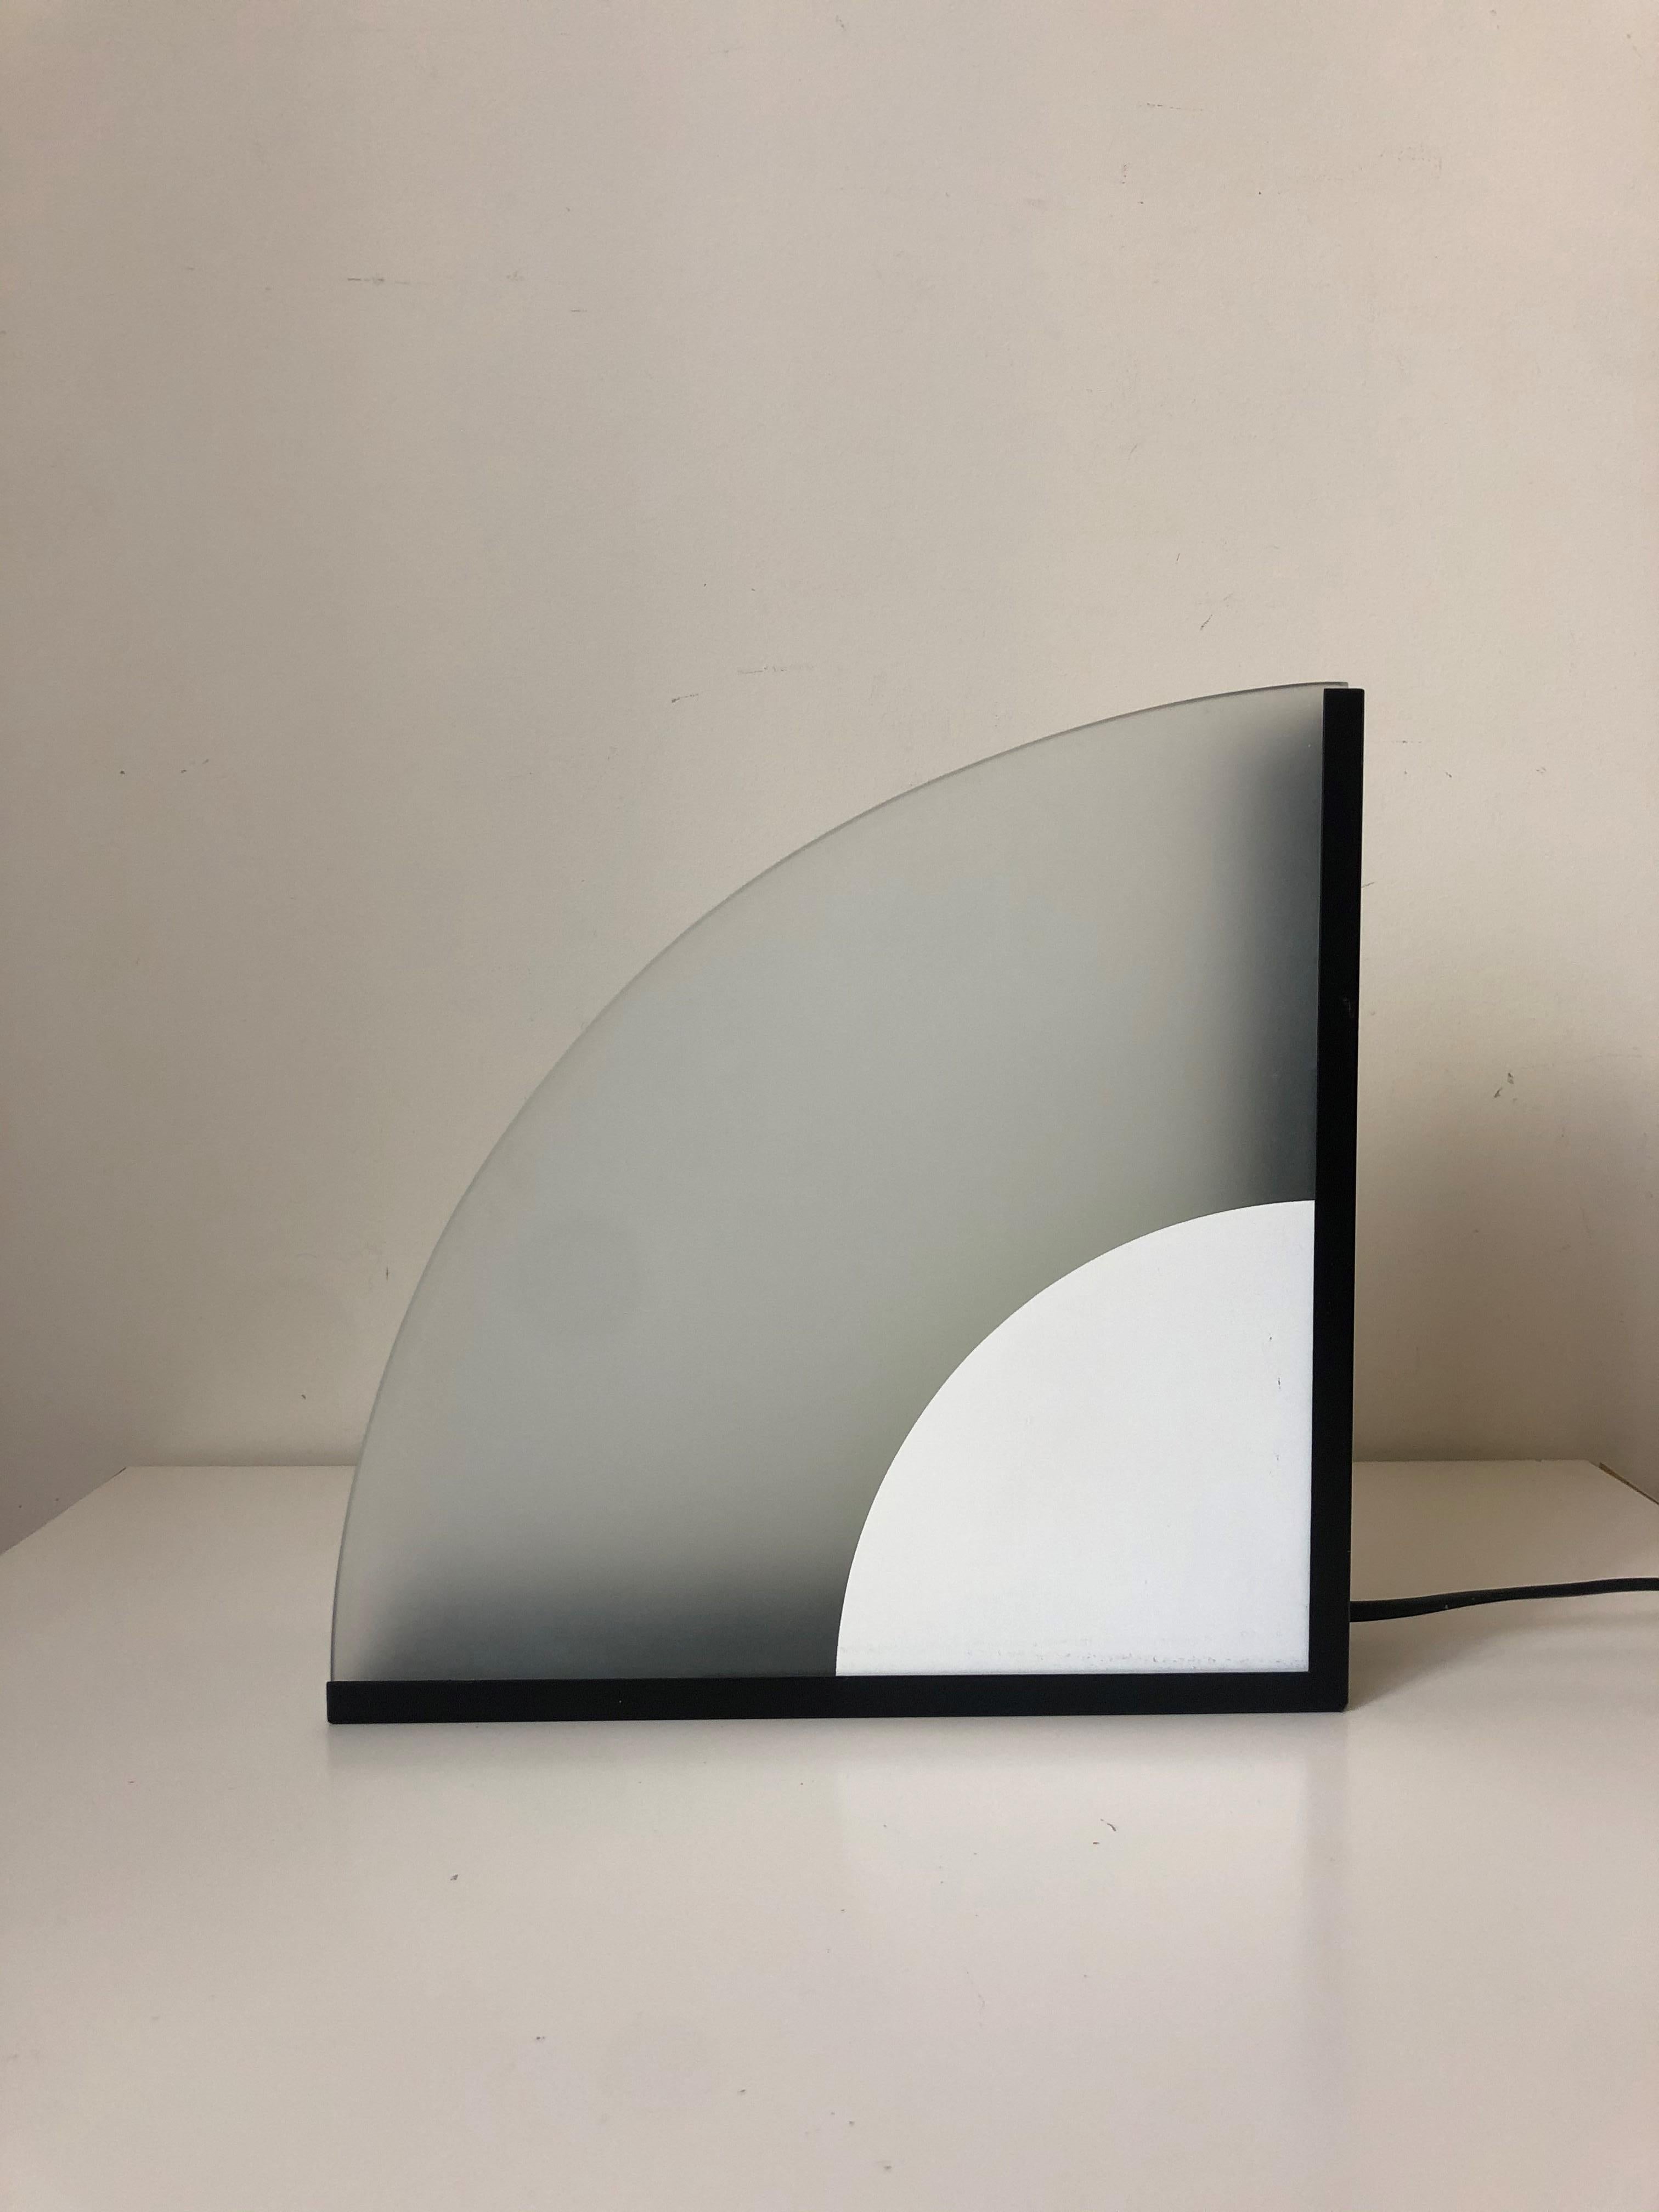 Italian Postmodern Pair of White Black Glass and Metal Table Lamps, 1980s In Good Condition For Sale In Badajoz, Badajoz